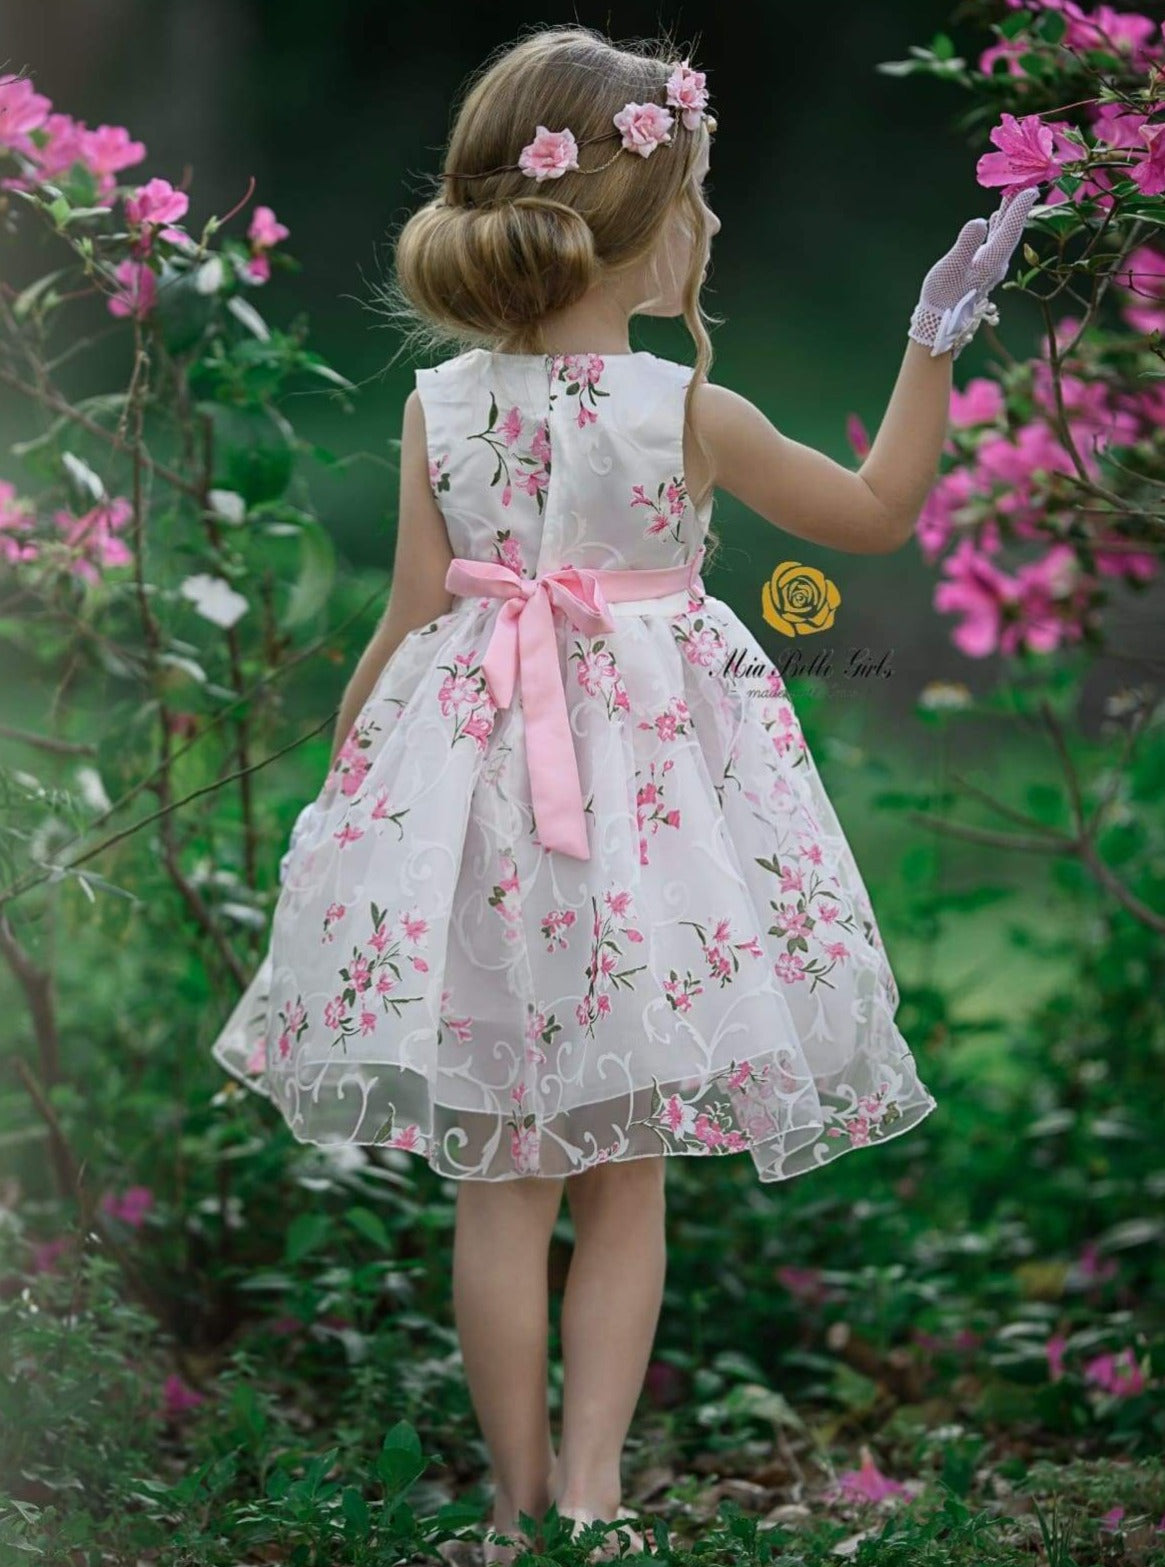 Girls Sleeveless Floral Print Special Occasion Party Dress with Flower Sash - Girls Spring Dressy Dress